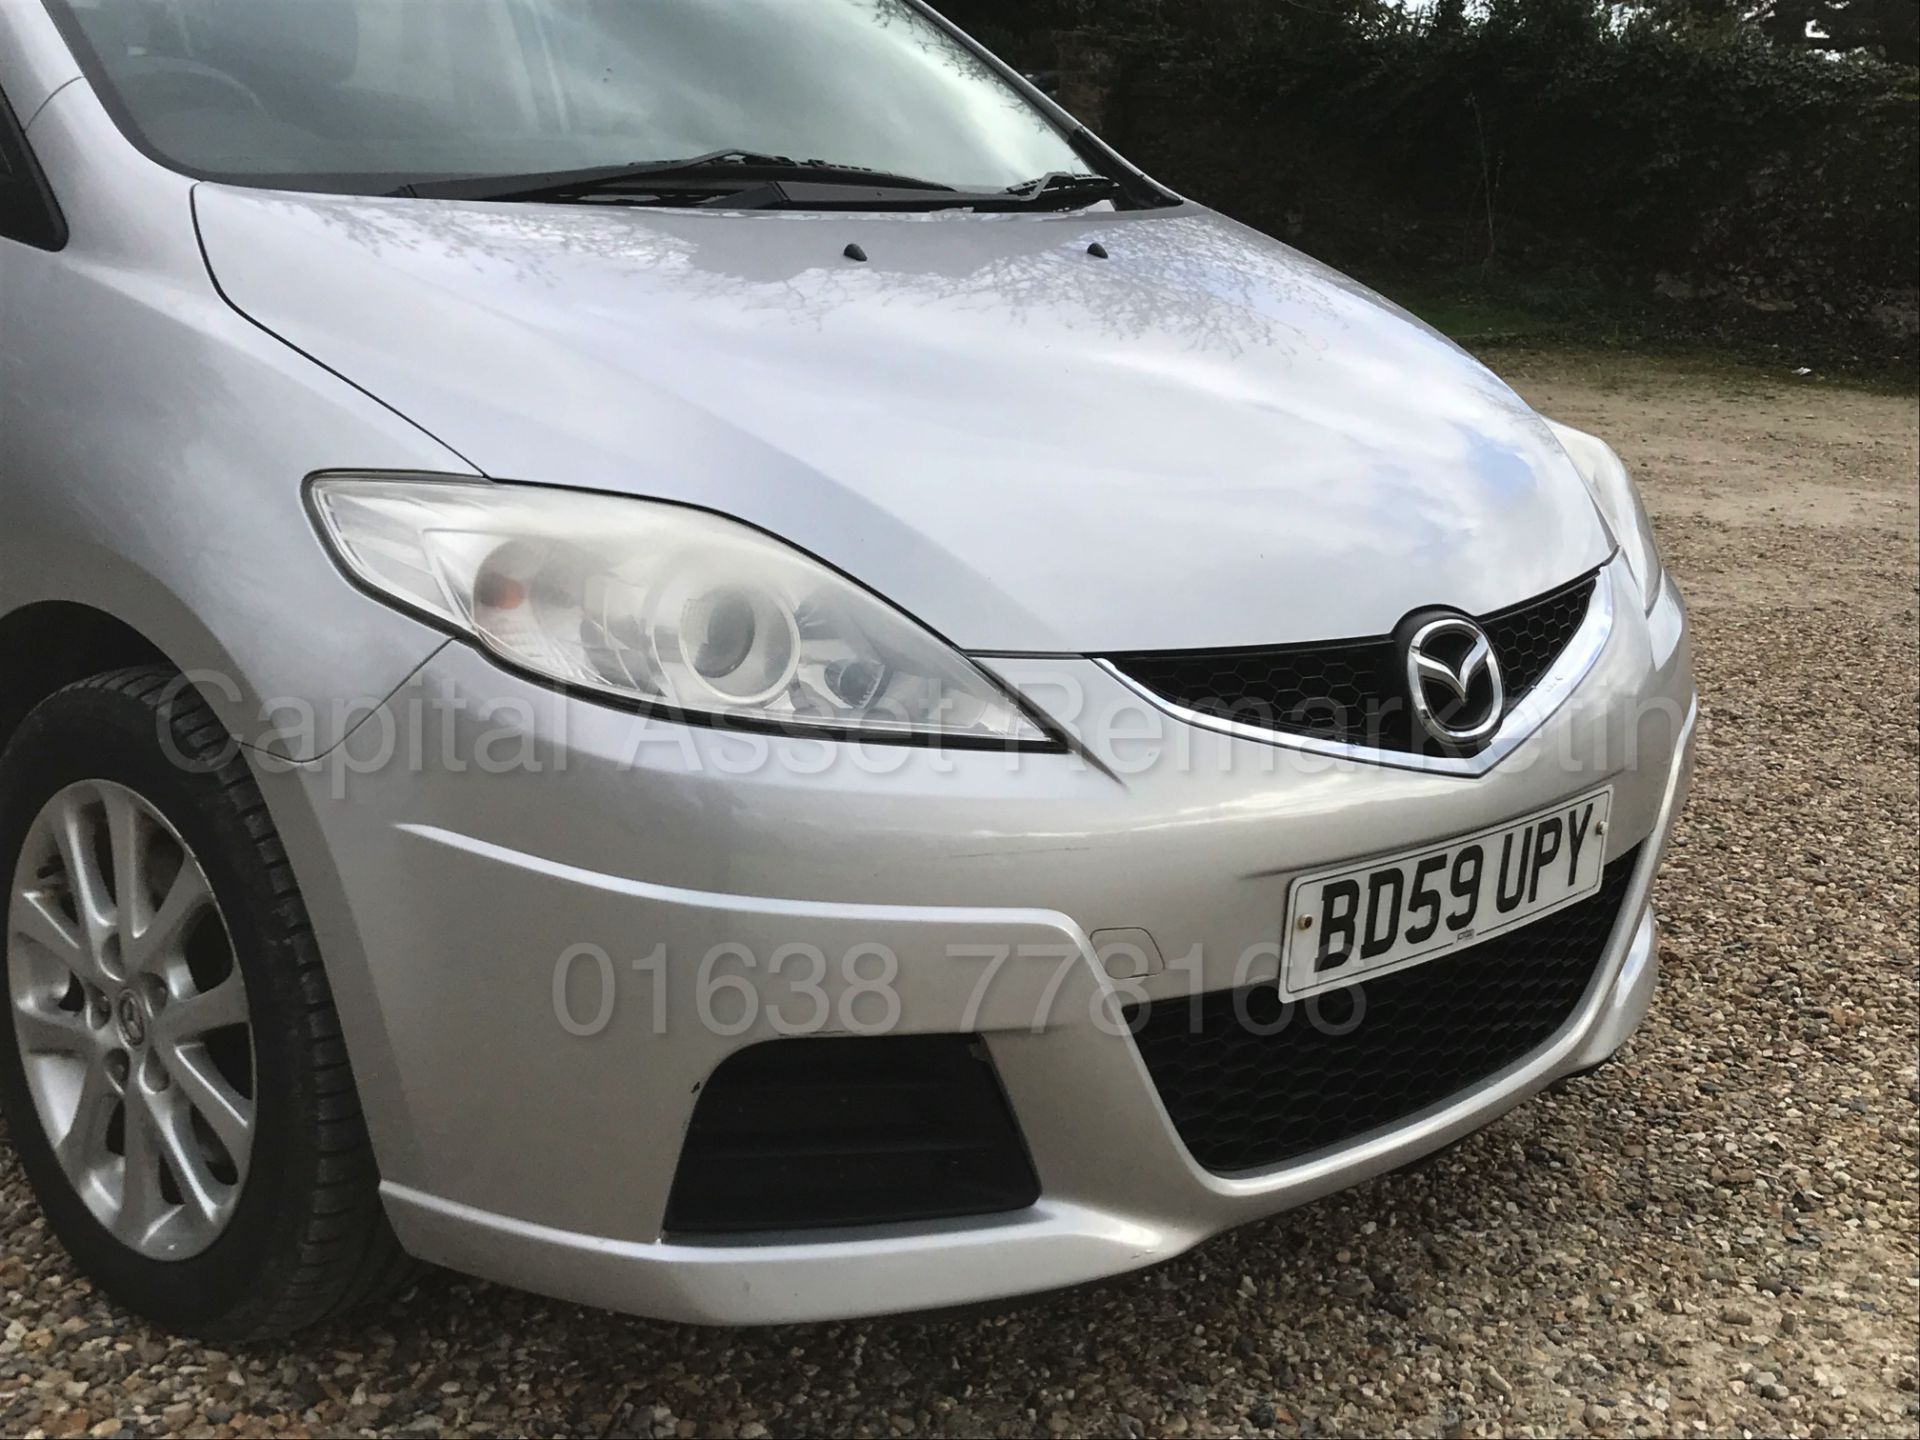 (On Sale) MAZDA 5 'TS2' (2010 MODEL) '2.0 DIESEL - 110 BHP - 6 SPEED' *7 SEATER - AIR CON* (NO VAT) - Image 13 of 35